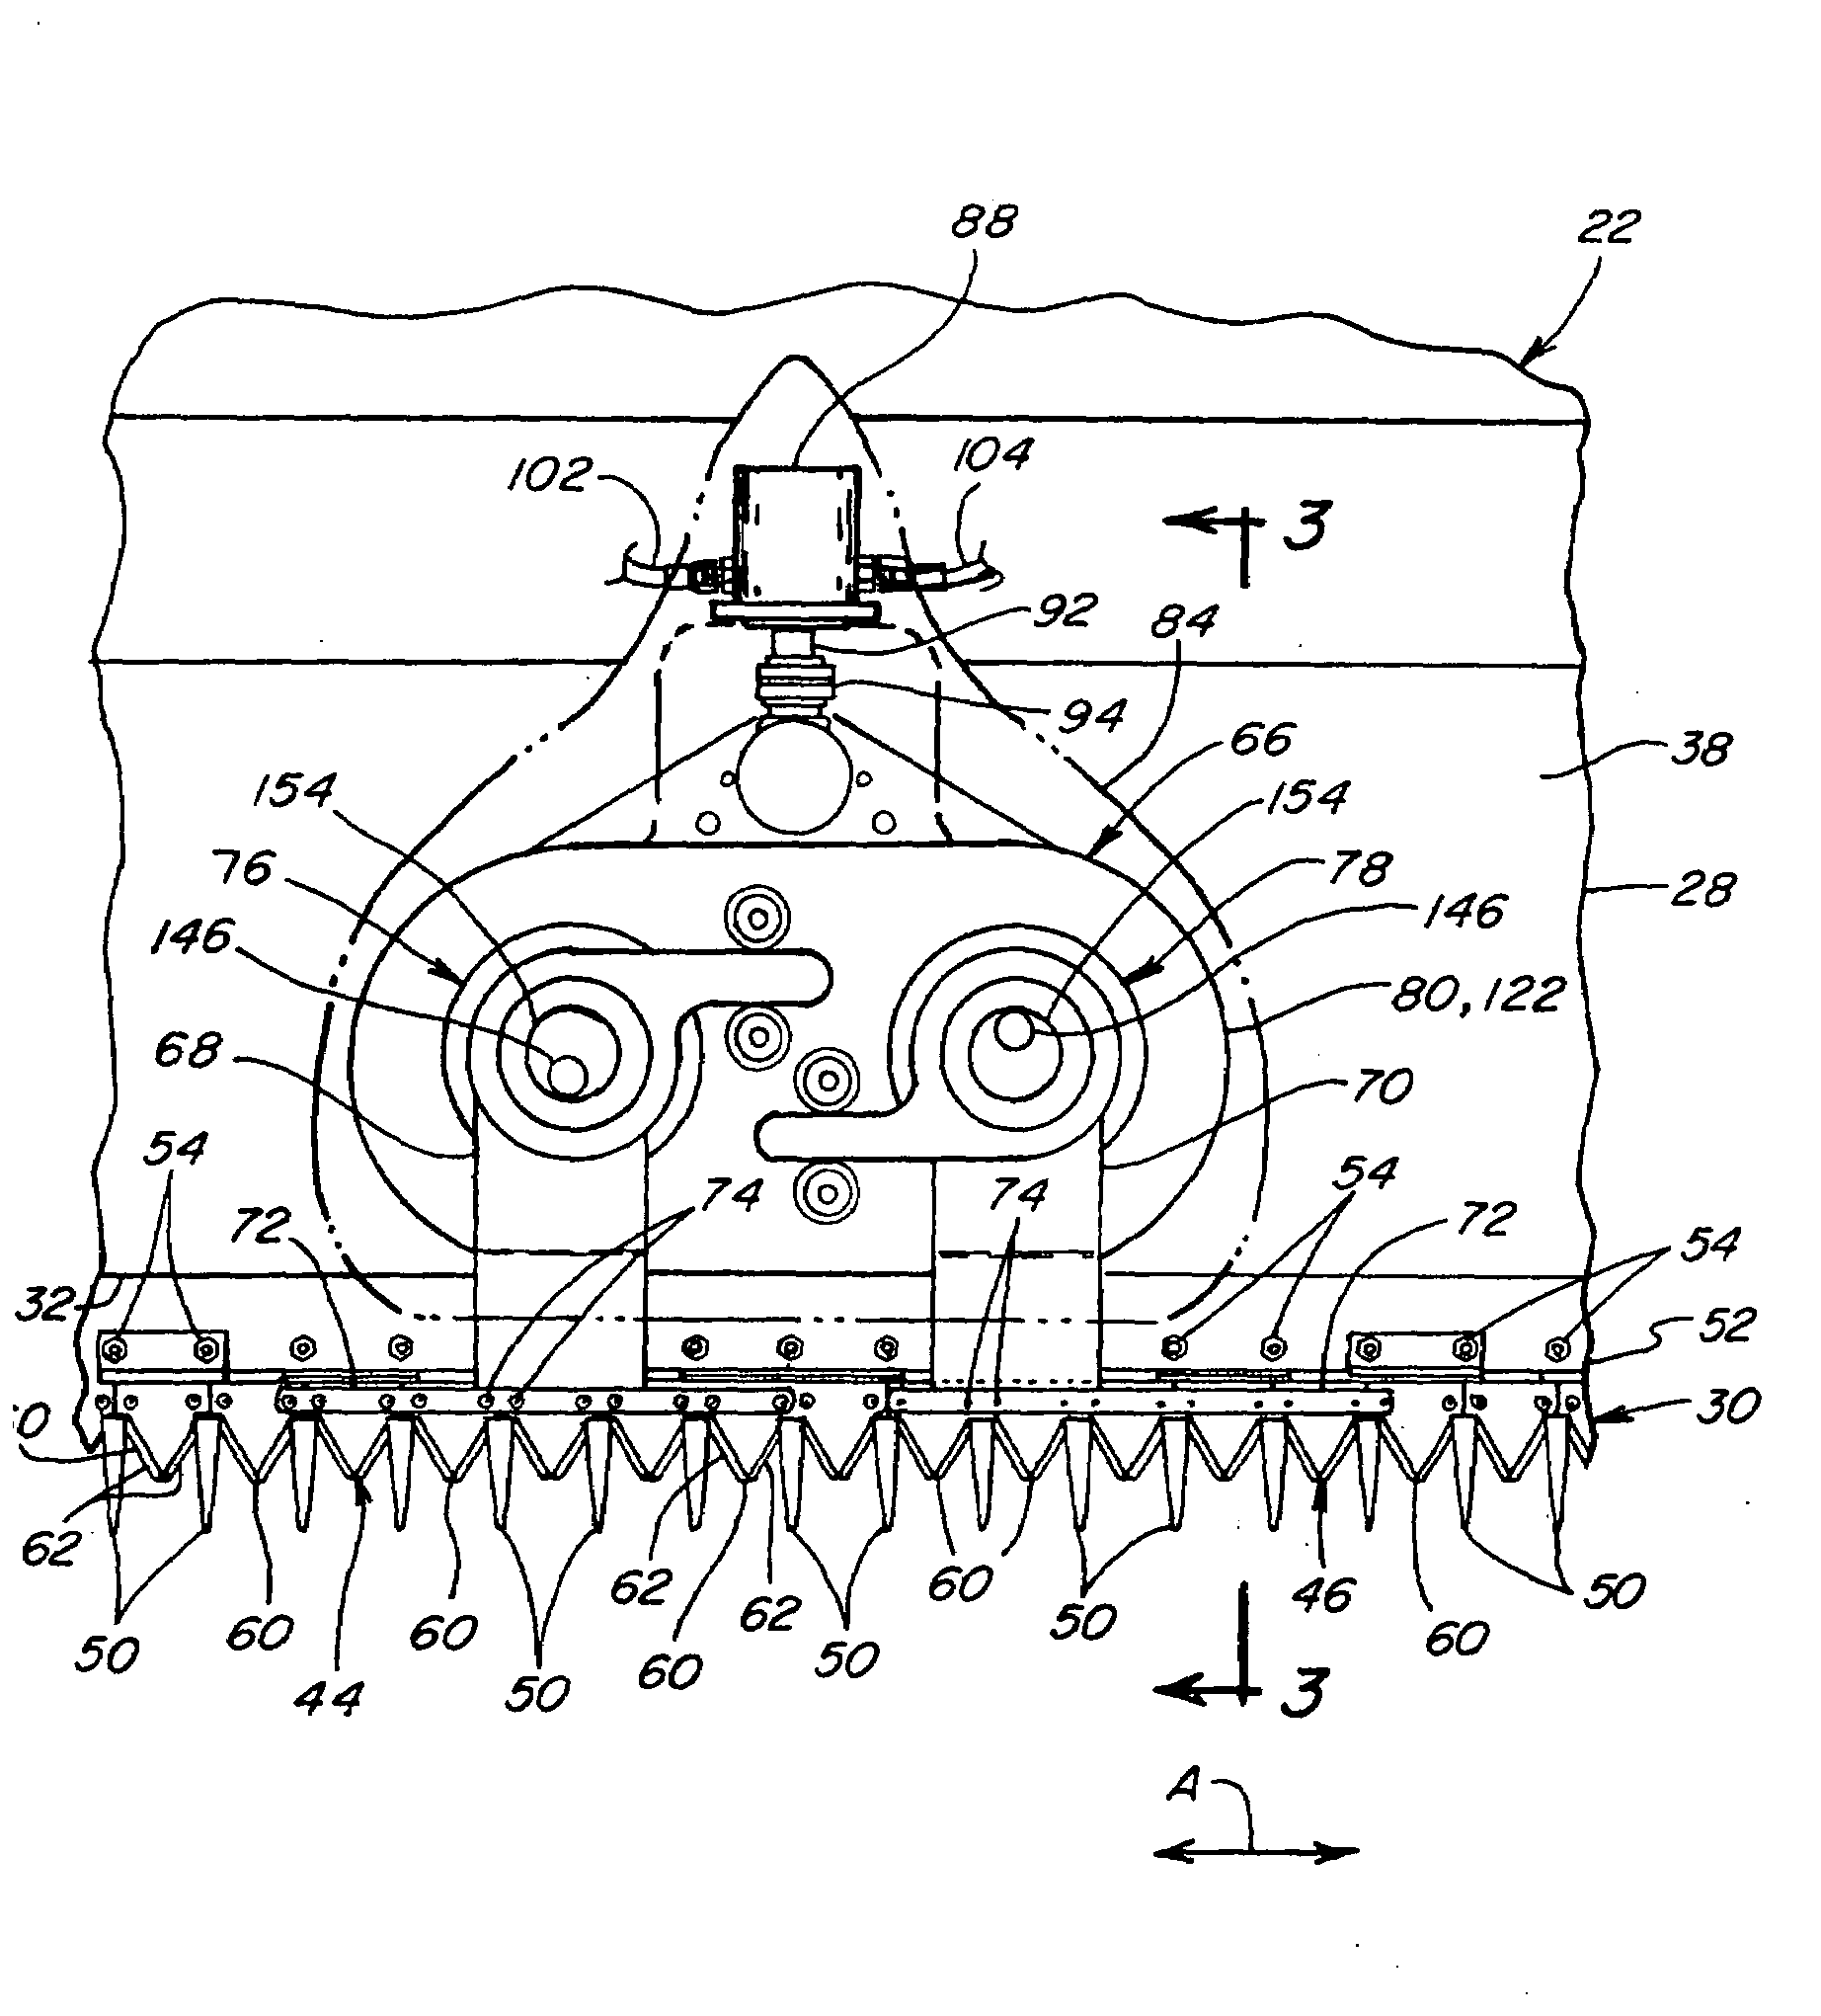 Offset epicyclic sickle drive for a header of an agricultural plant cutting machine